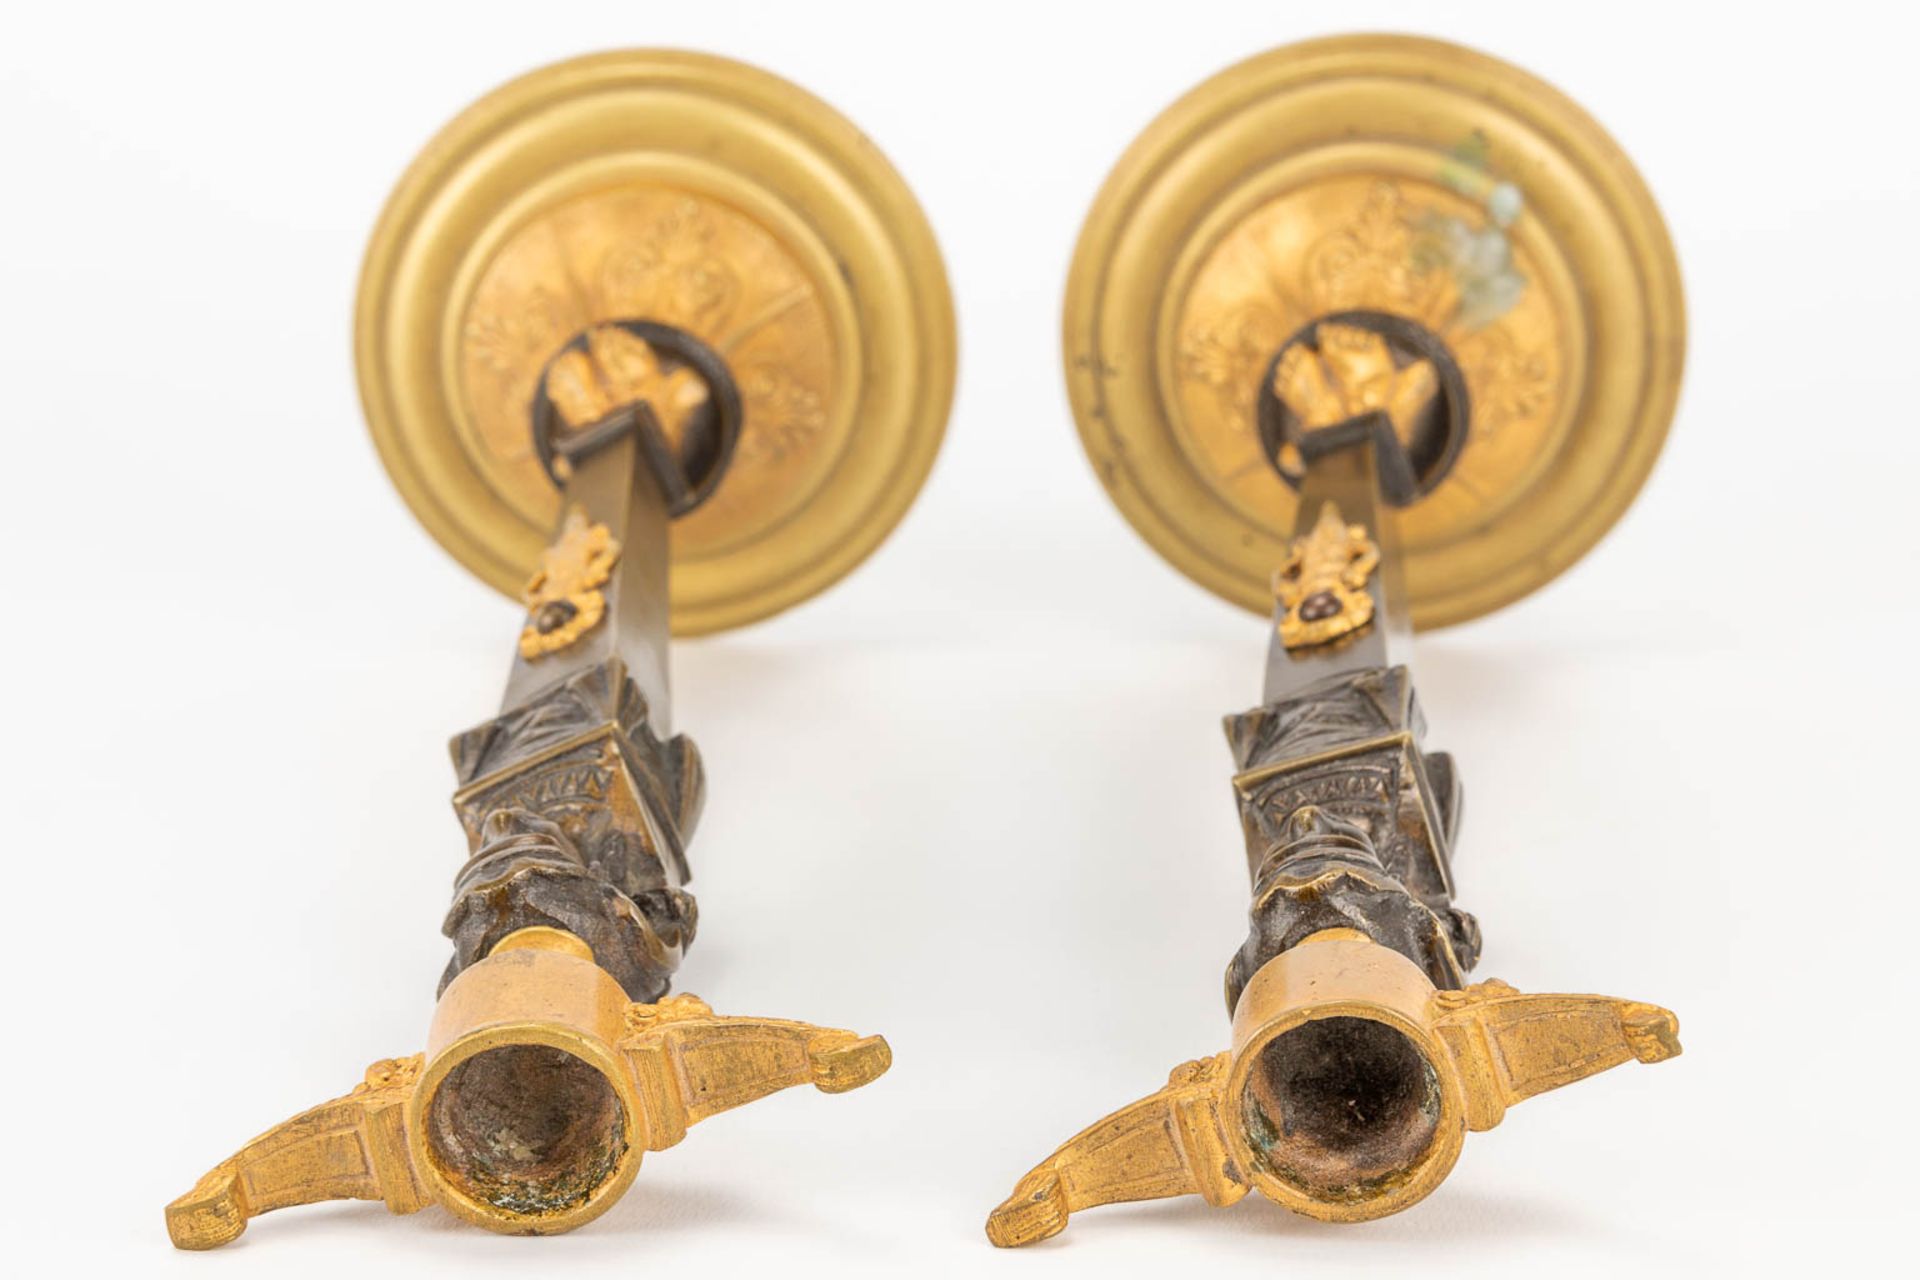 A pair of candlesticks made of gilt and patinated bronze in empire style. (27,5 x 9,5 cm) - Image 7 of 15